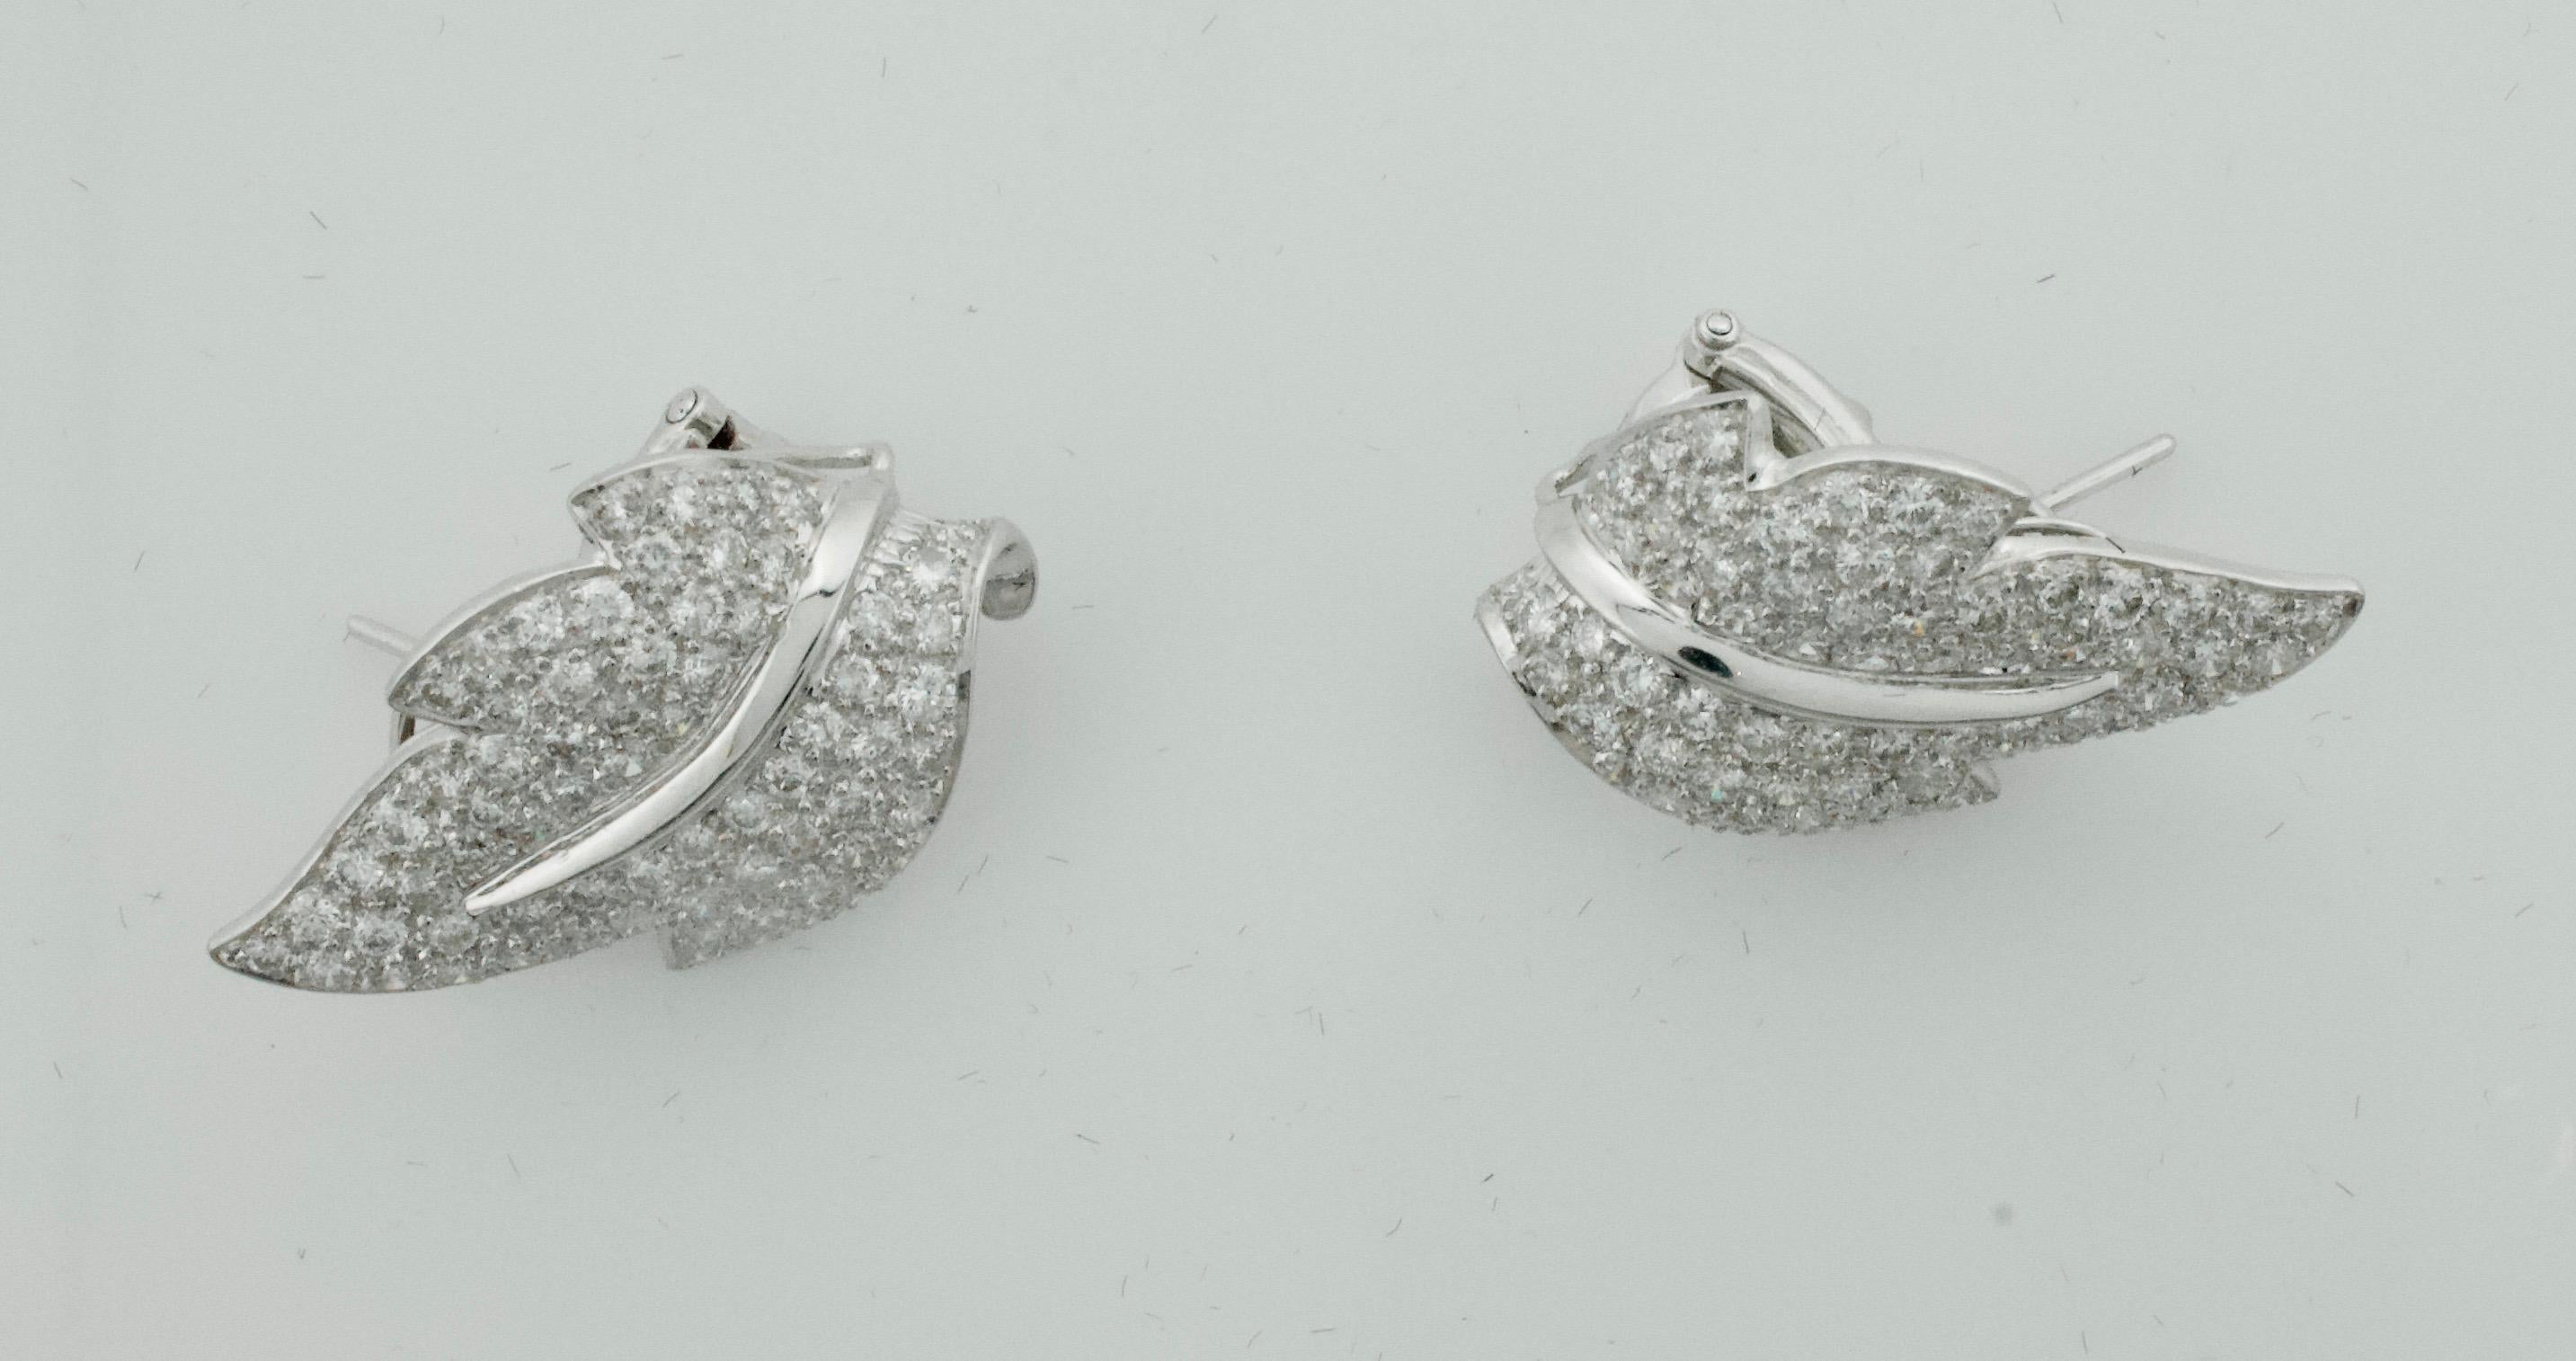 Diamond Platinum Leaf Earrings  4.00 carats
One Hundred and Fifty Round Brilliant Cut Diamonds weighing 4.00 carats approximately [GH VVS-VS1]
Very Fine Quality